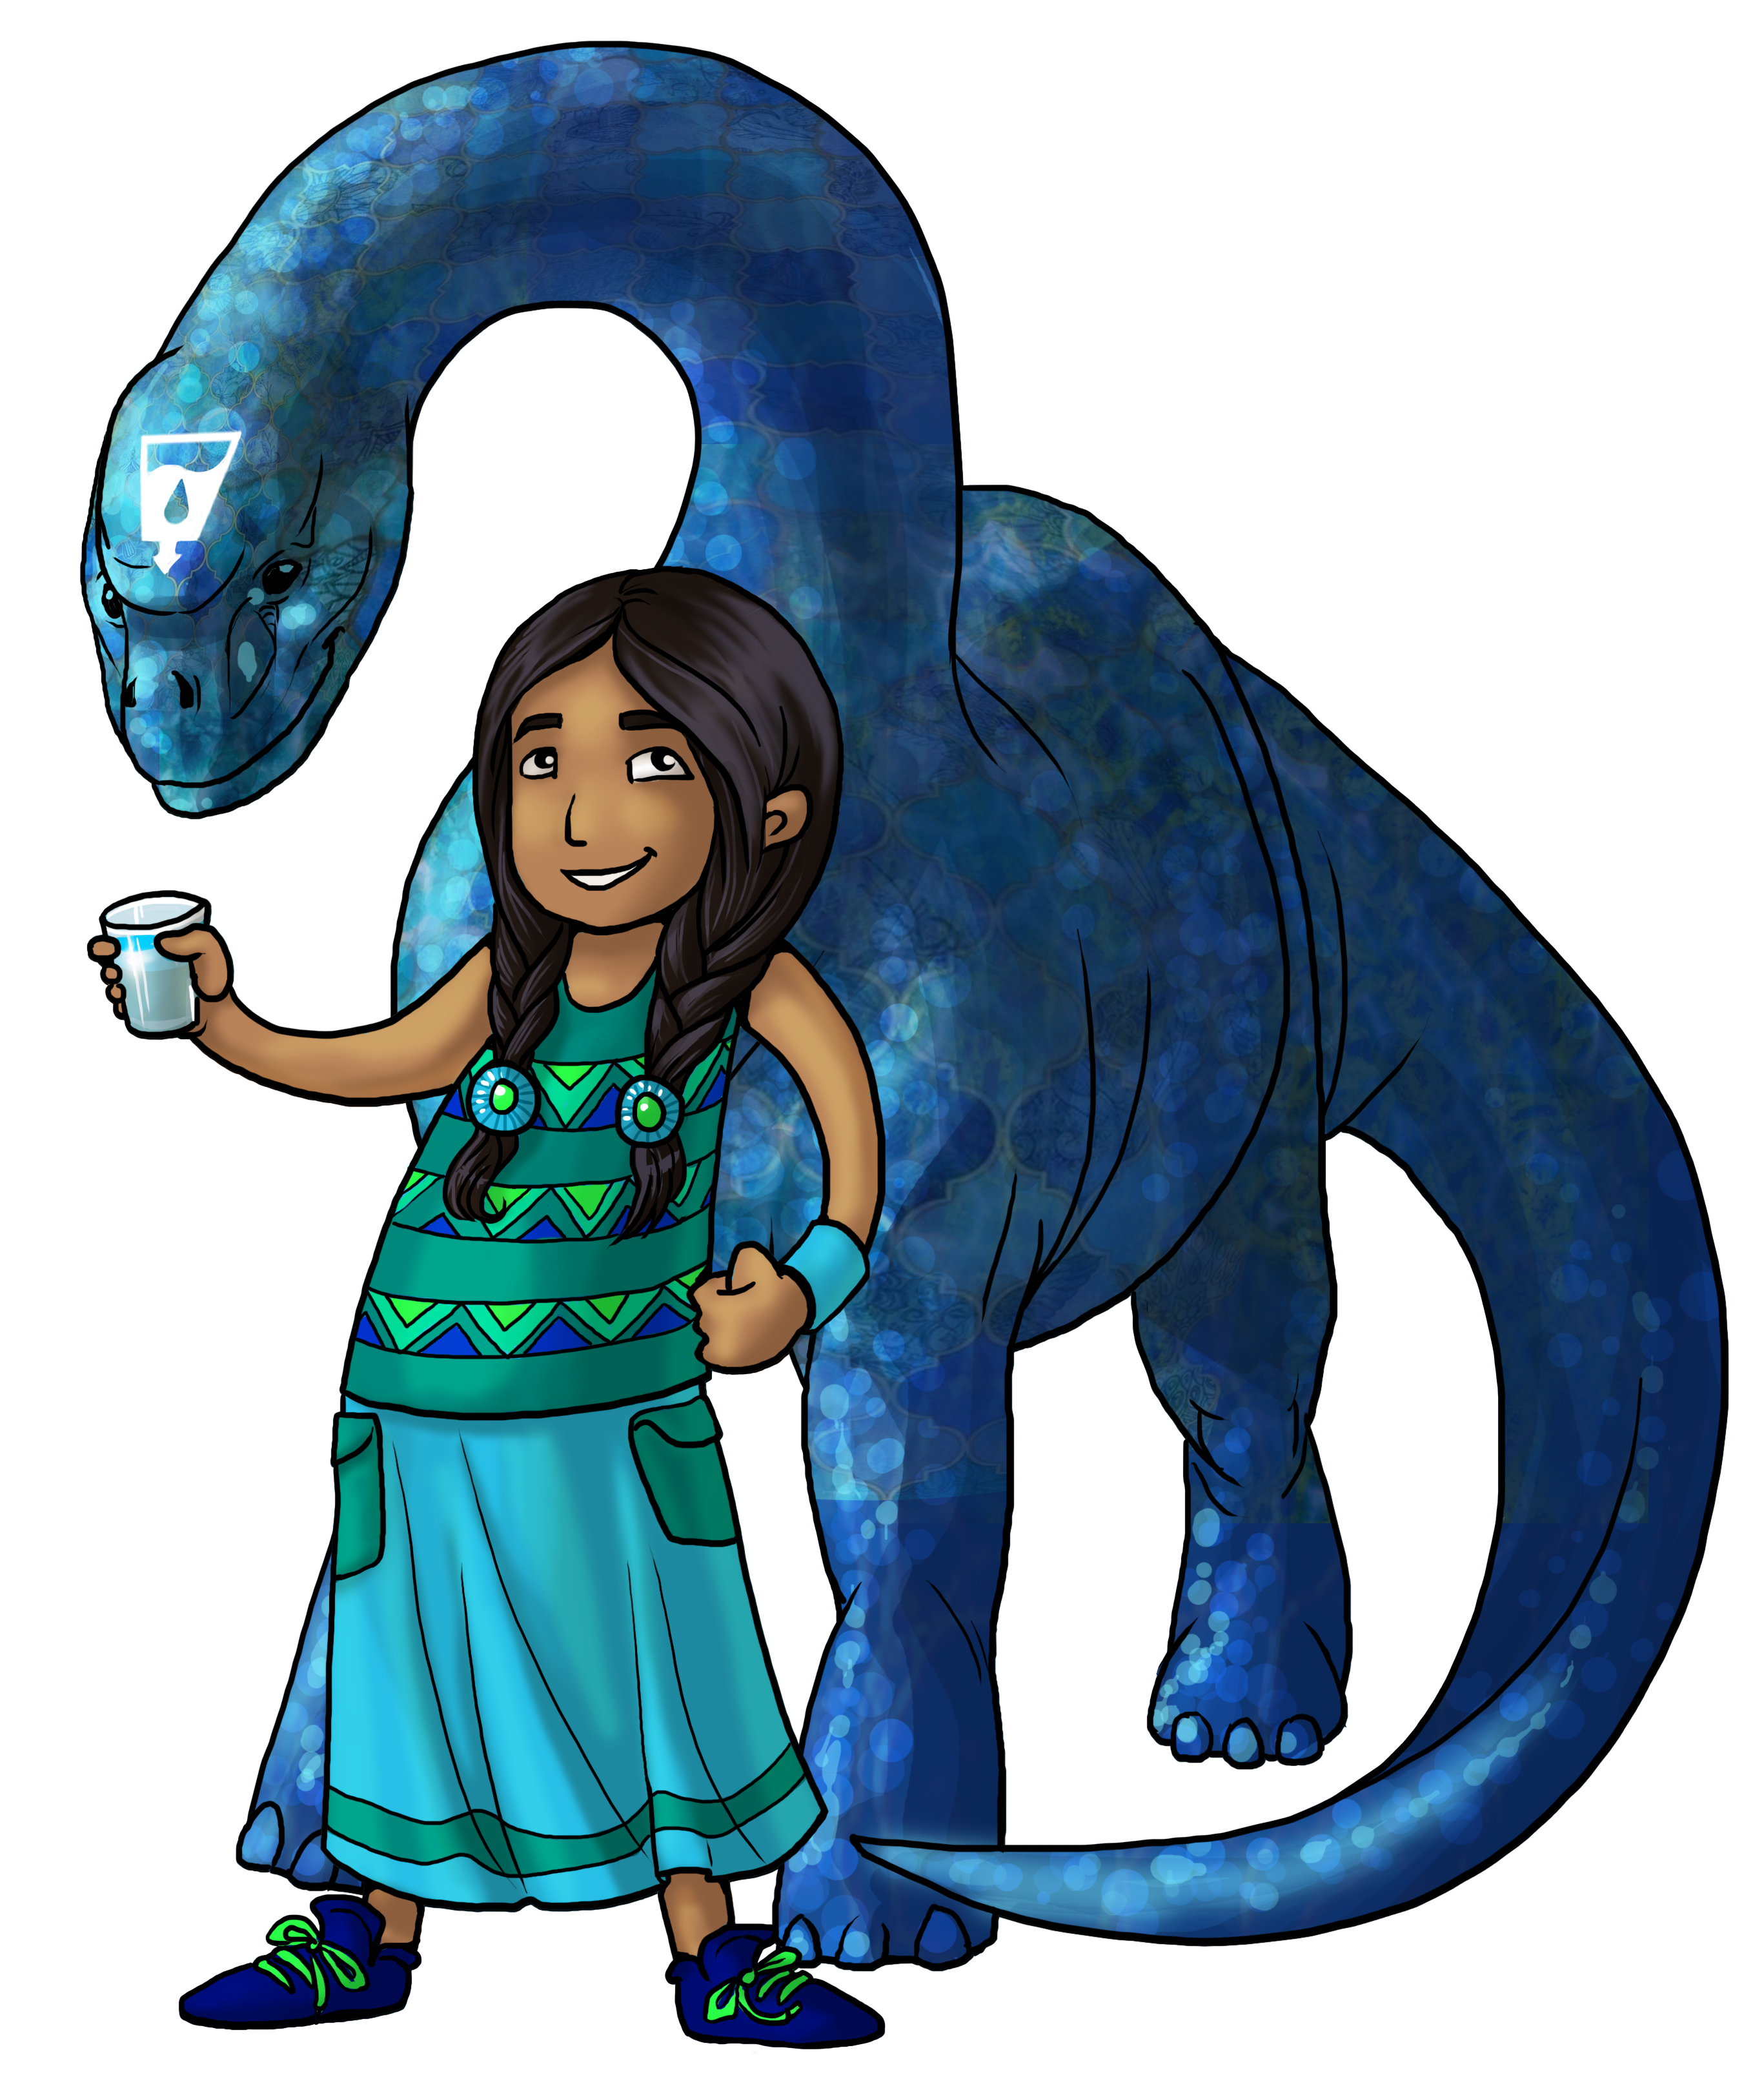 Illustration. A child is holding a glass of water. Behind is a dinosaur.